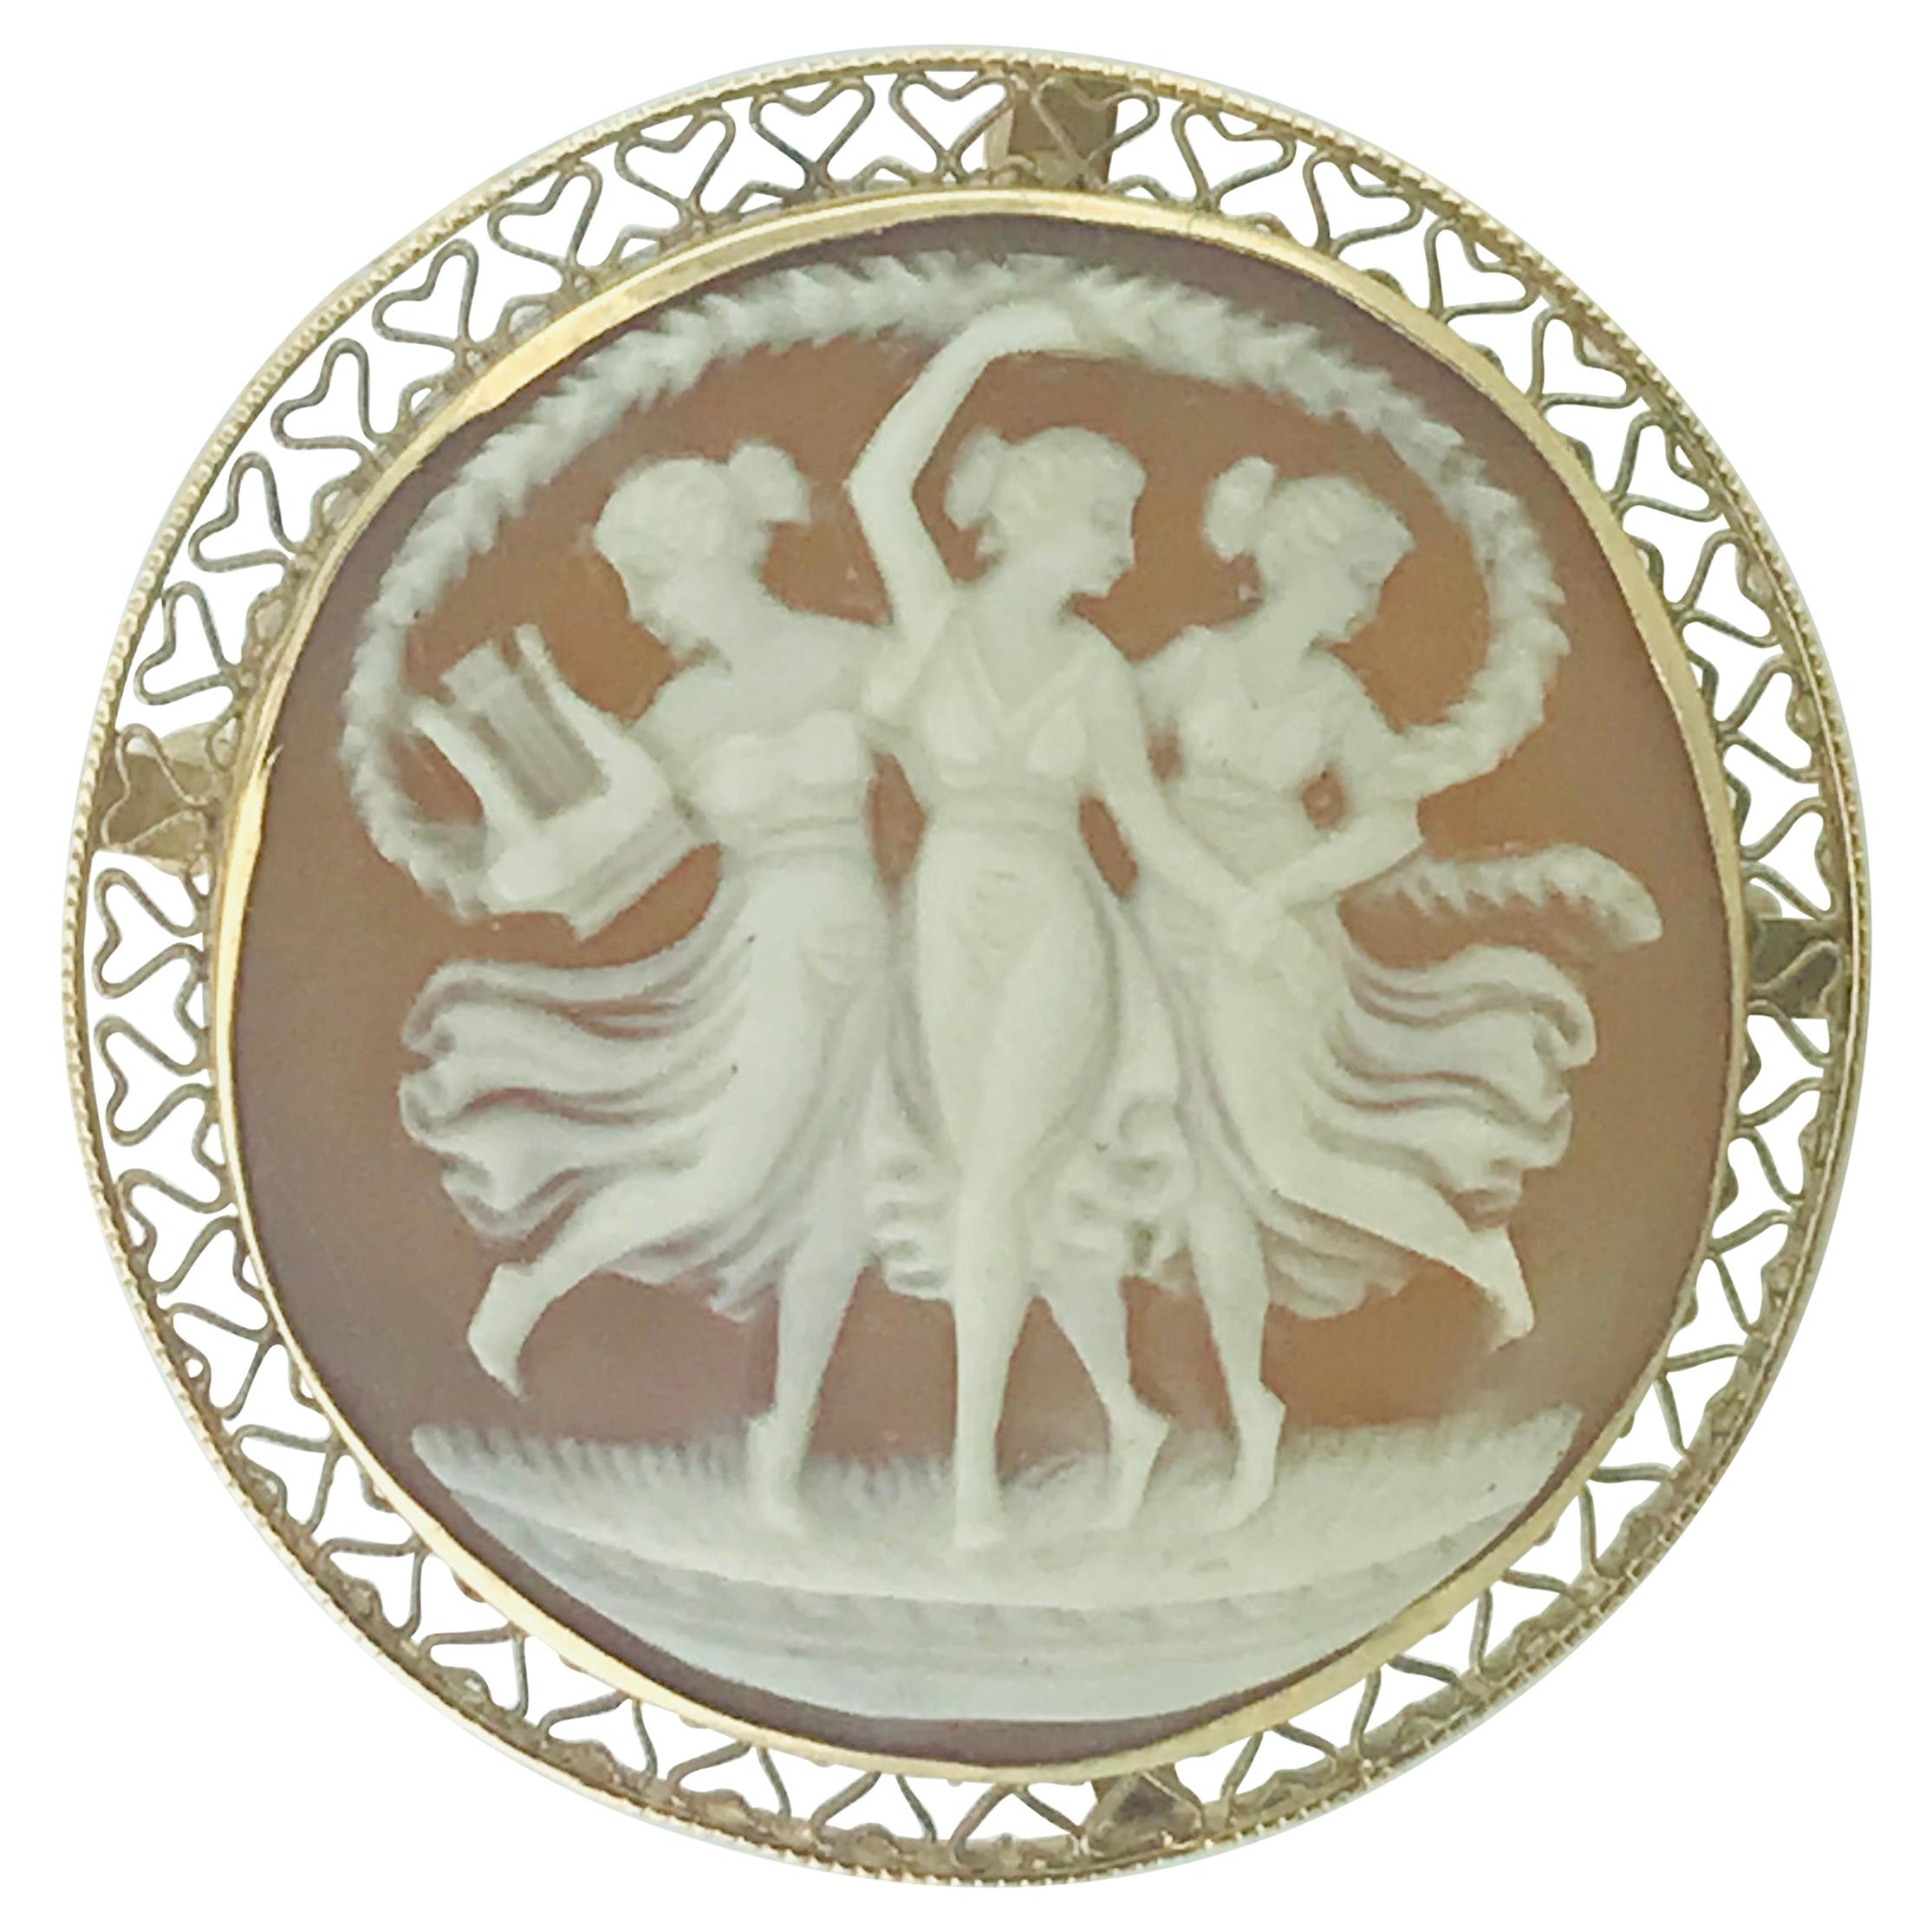 Vintage Cameo Brooch/Pin of Three Graces in 14 Karat Yellow Gold Filigree Frame